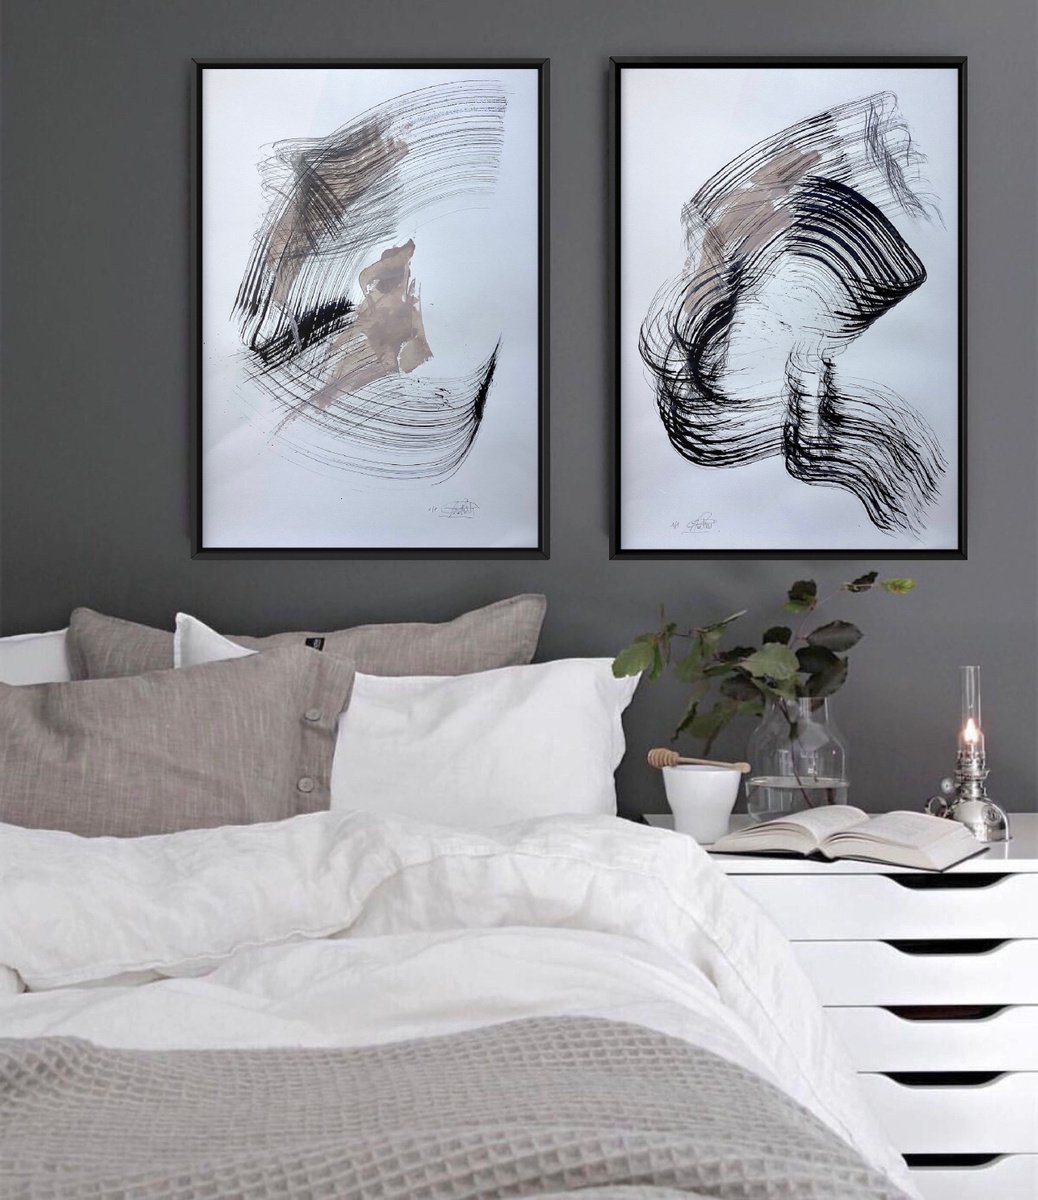 SPECIAL OFFER! Dreamers diptych by Roberta Cervelli